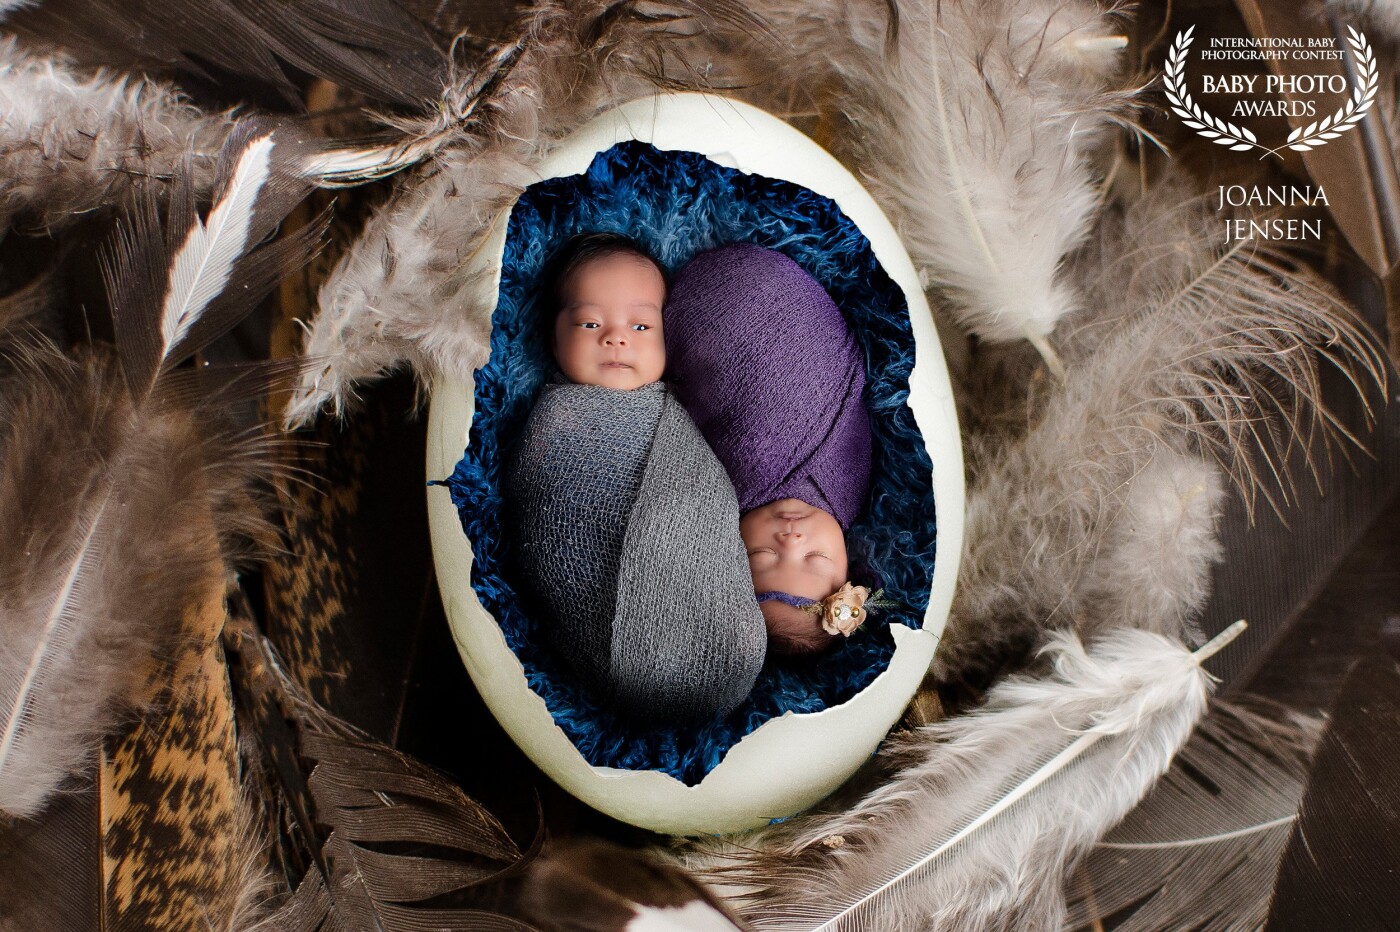 Adorable boy and girl twins got all snuggled up and swaddled like adorable baby birds in a nest in this natural-looking outdoorsy sweet set-up.  Mom and dad are newcomers to Calgary, Alberta, and love the rustic nature of the outdoors.   I was so happy to create this unique gift they can treasure for generations of their beautiful twin newborns.<br />
www.JoannaJensenPhotography.com